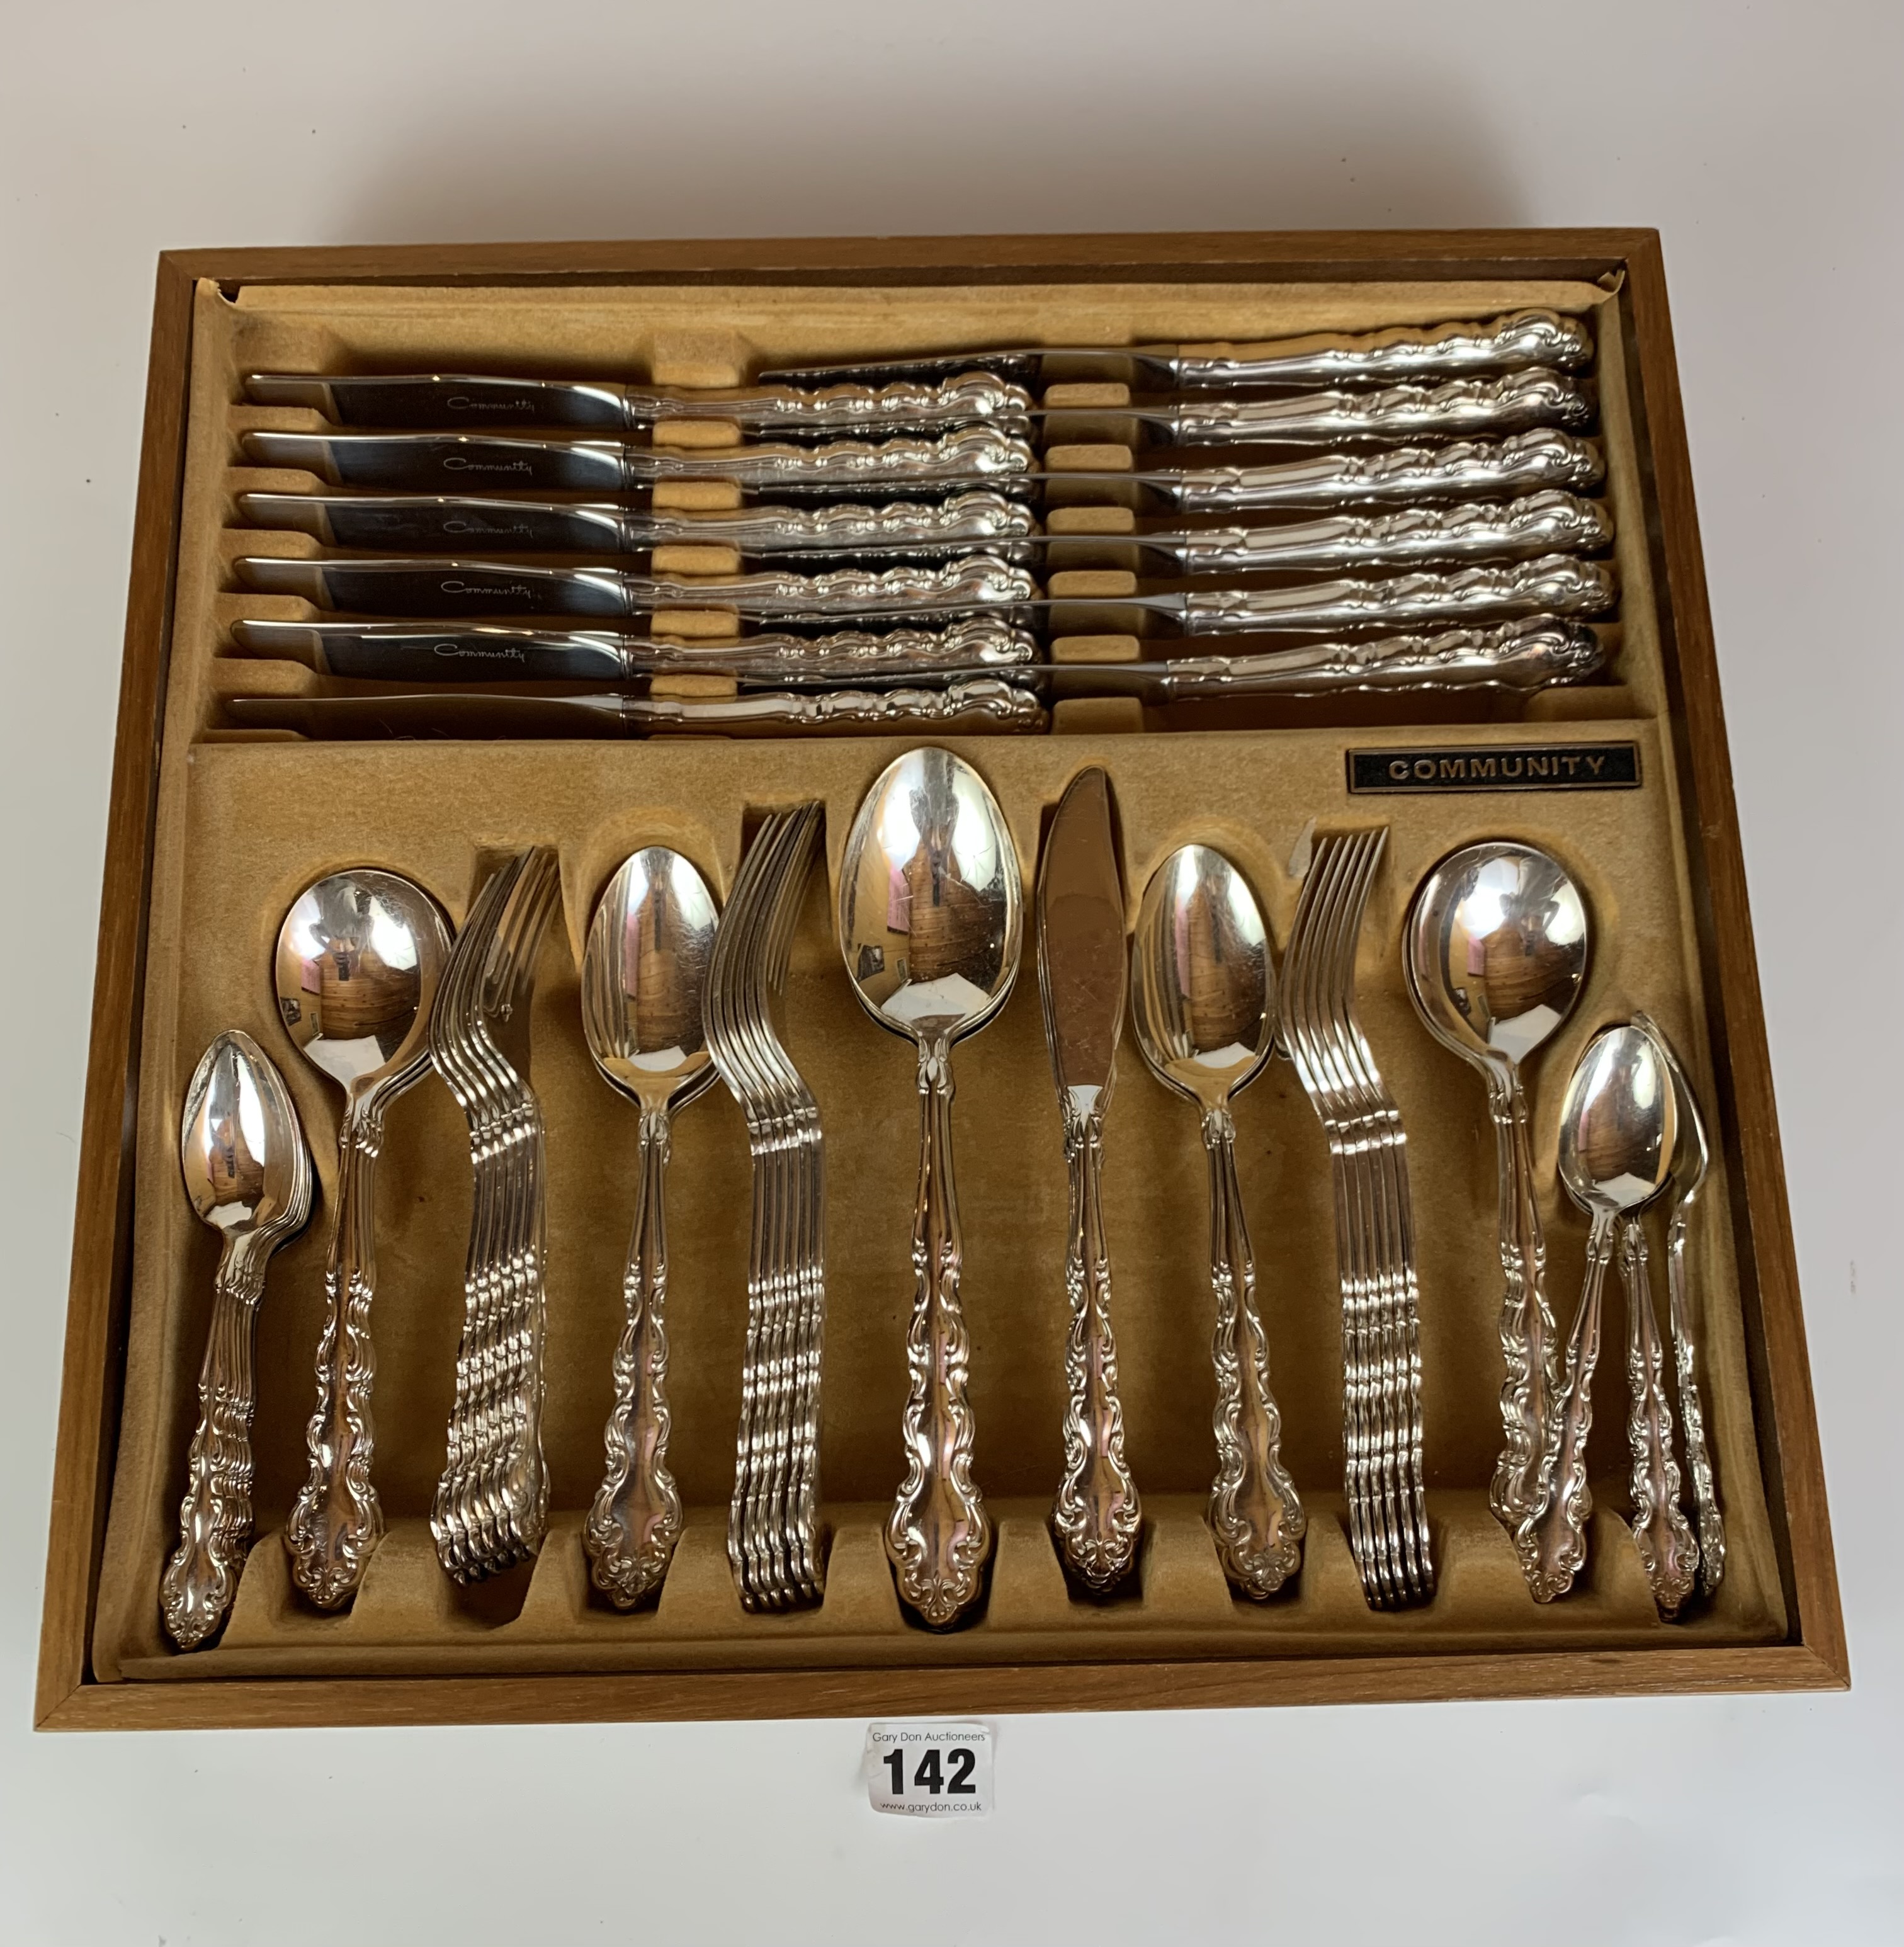 Cutlery drawer containing full set of 64 pieces of Community stainless steel cutlery - Image 2 of 4